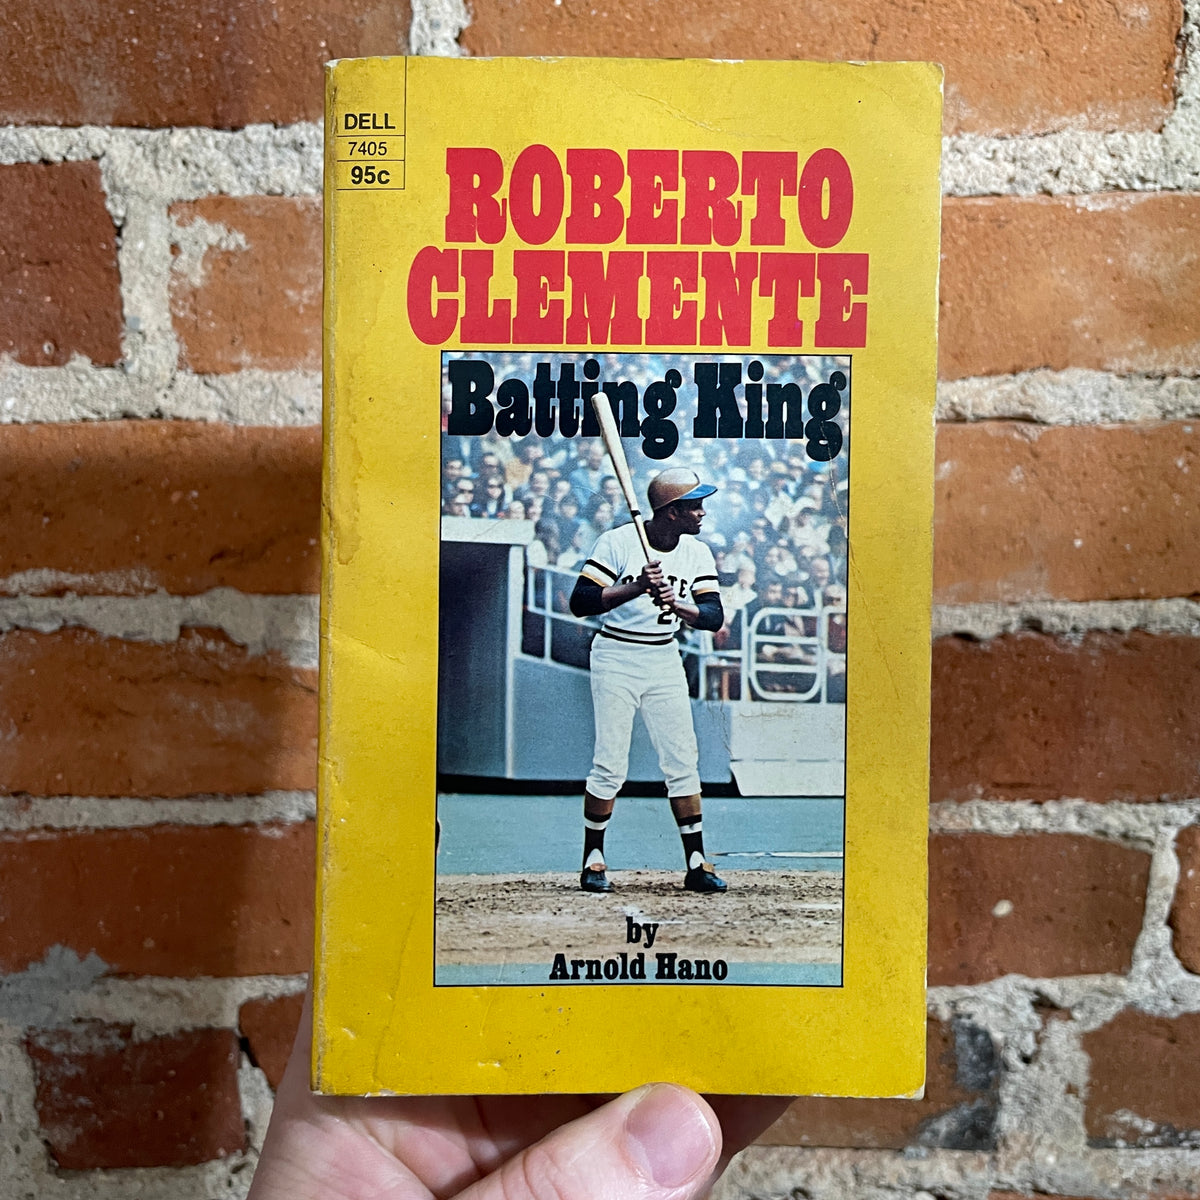 Roberto Clemente: Batting King by Arnold Hano